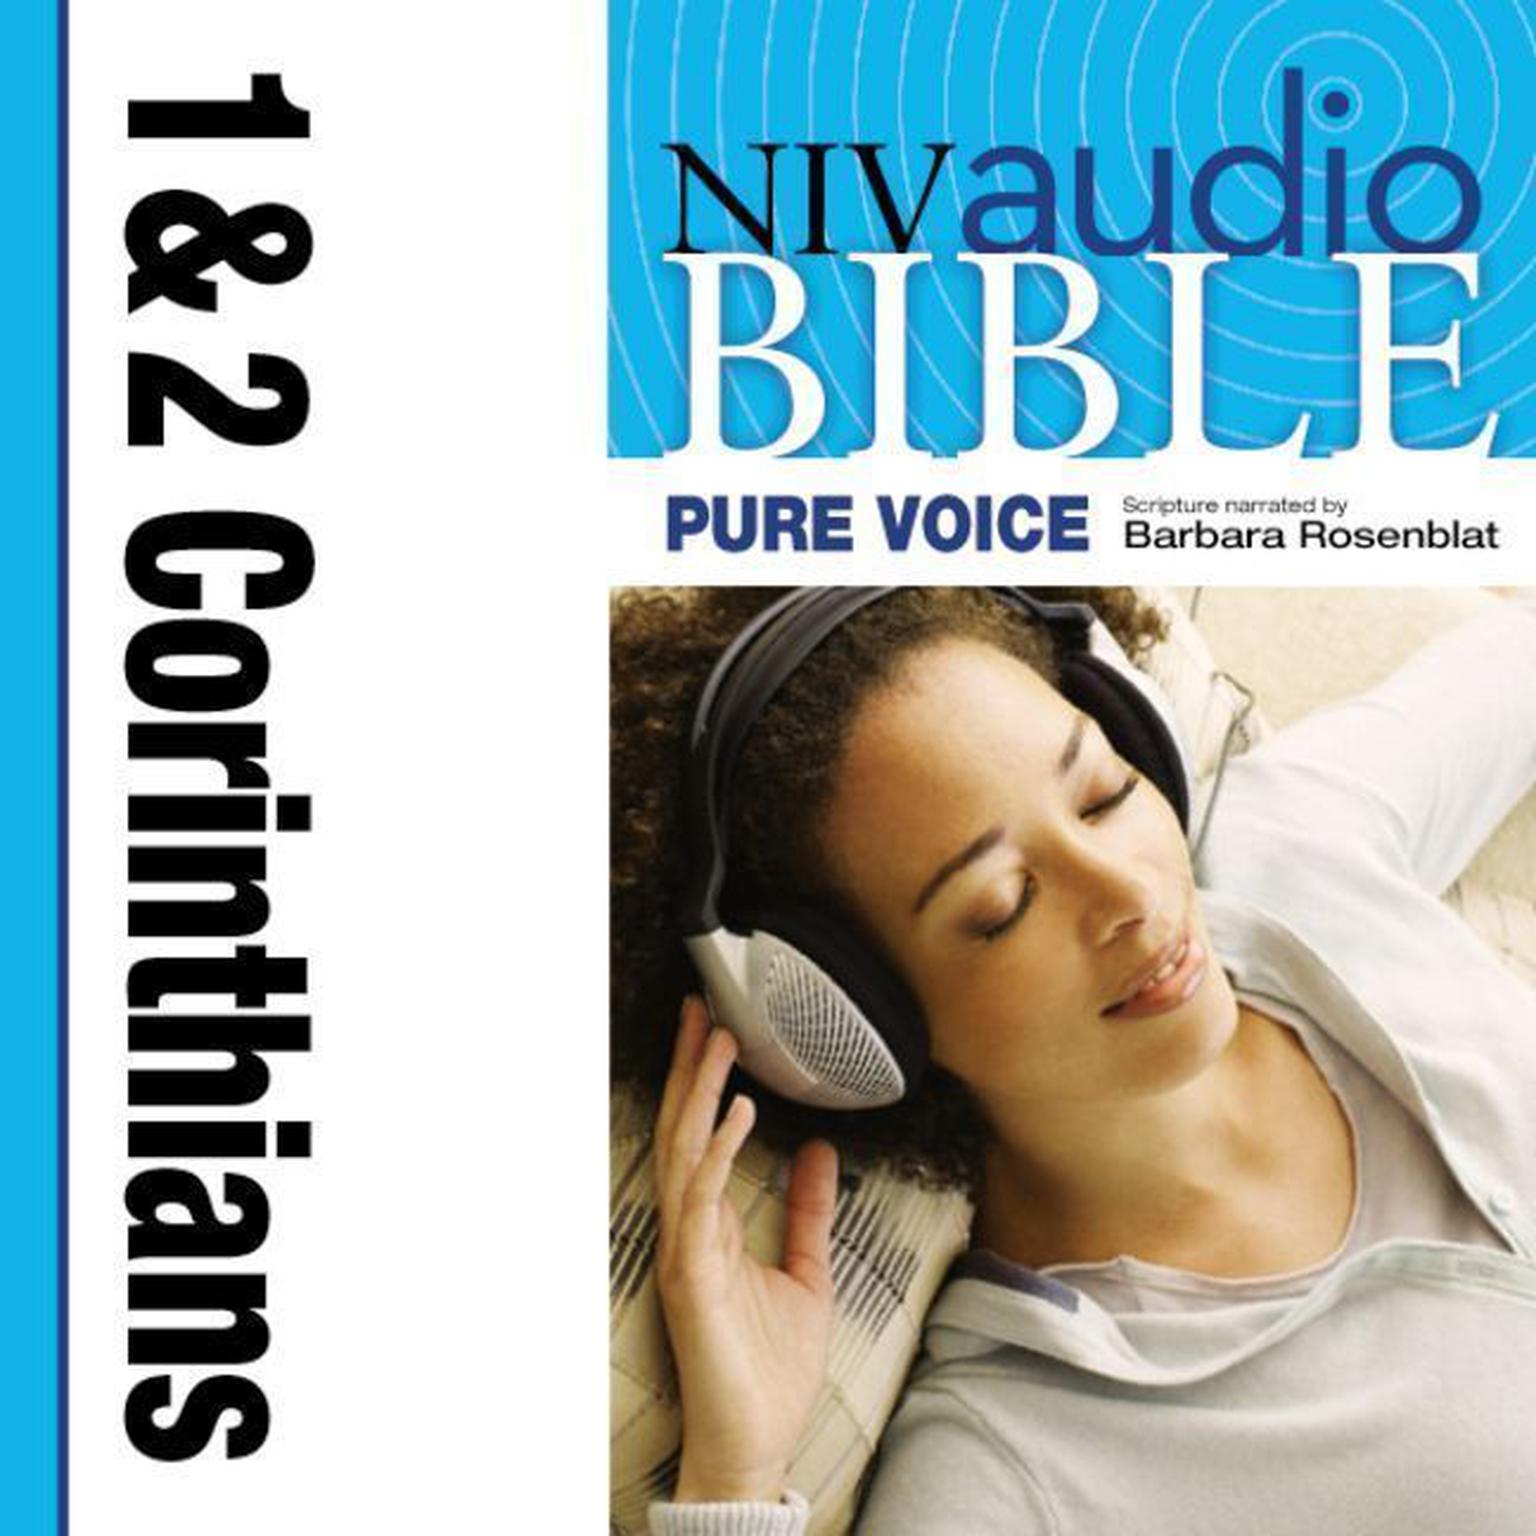 Pure Voice Audio Bible - New International Version, NIV (Narrated by Barbara Rosenblat): (07) 1 and 2 Corinthians Audiobook, by Zondervan